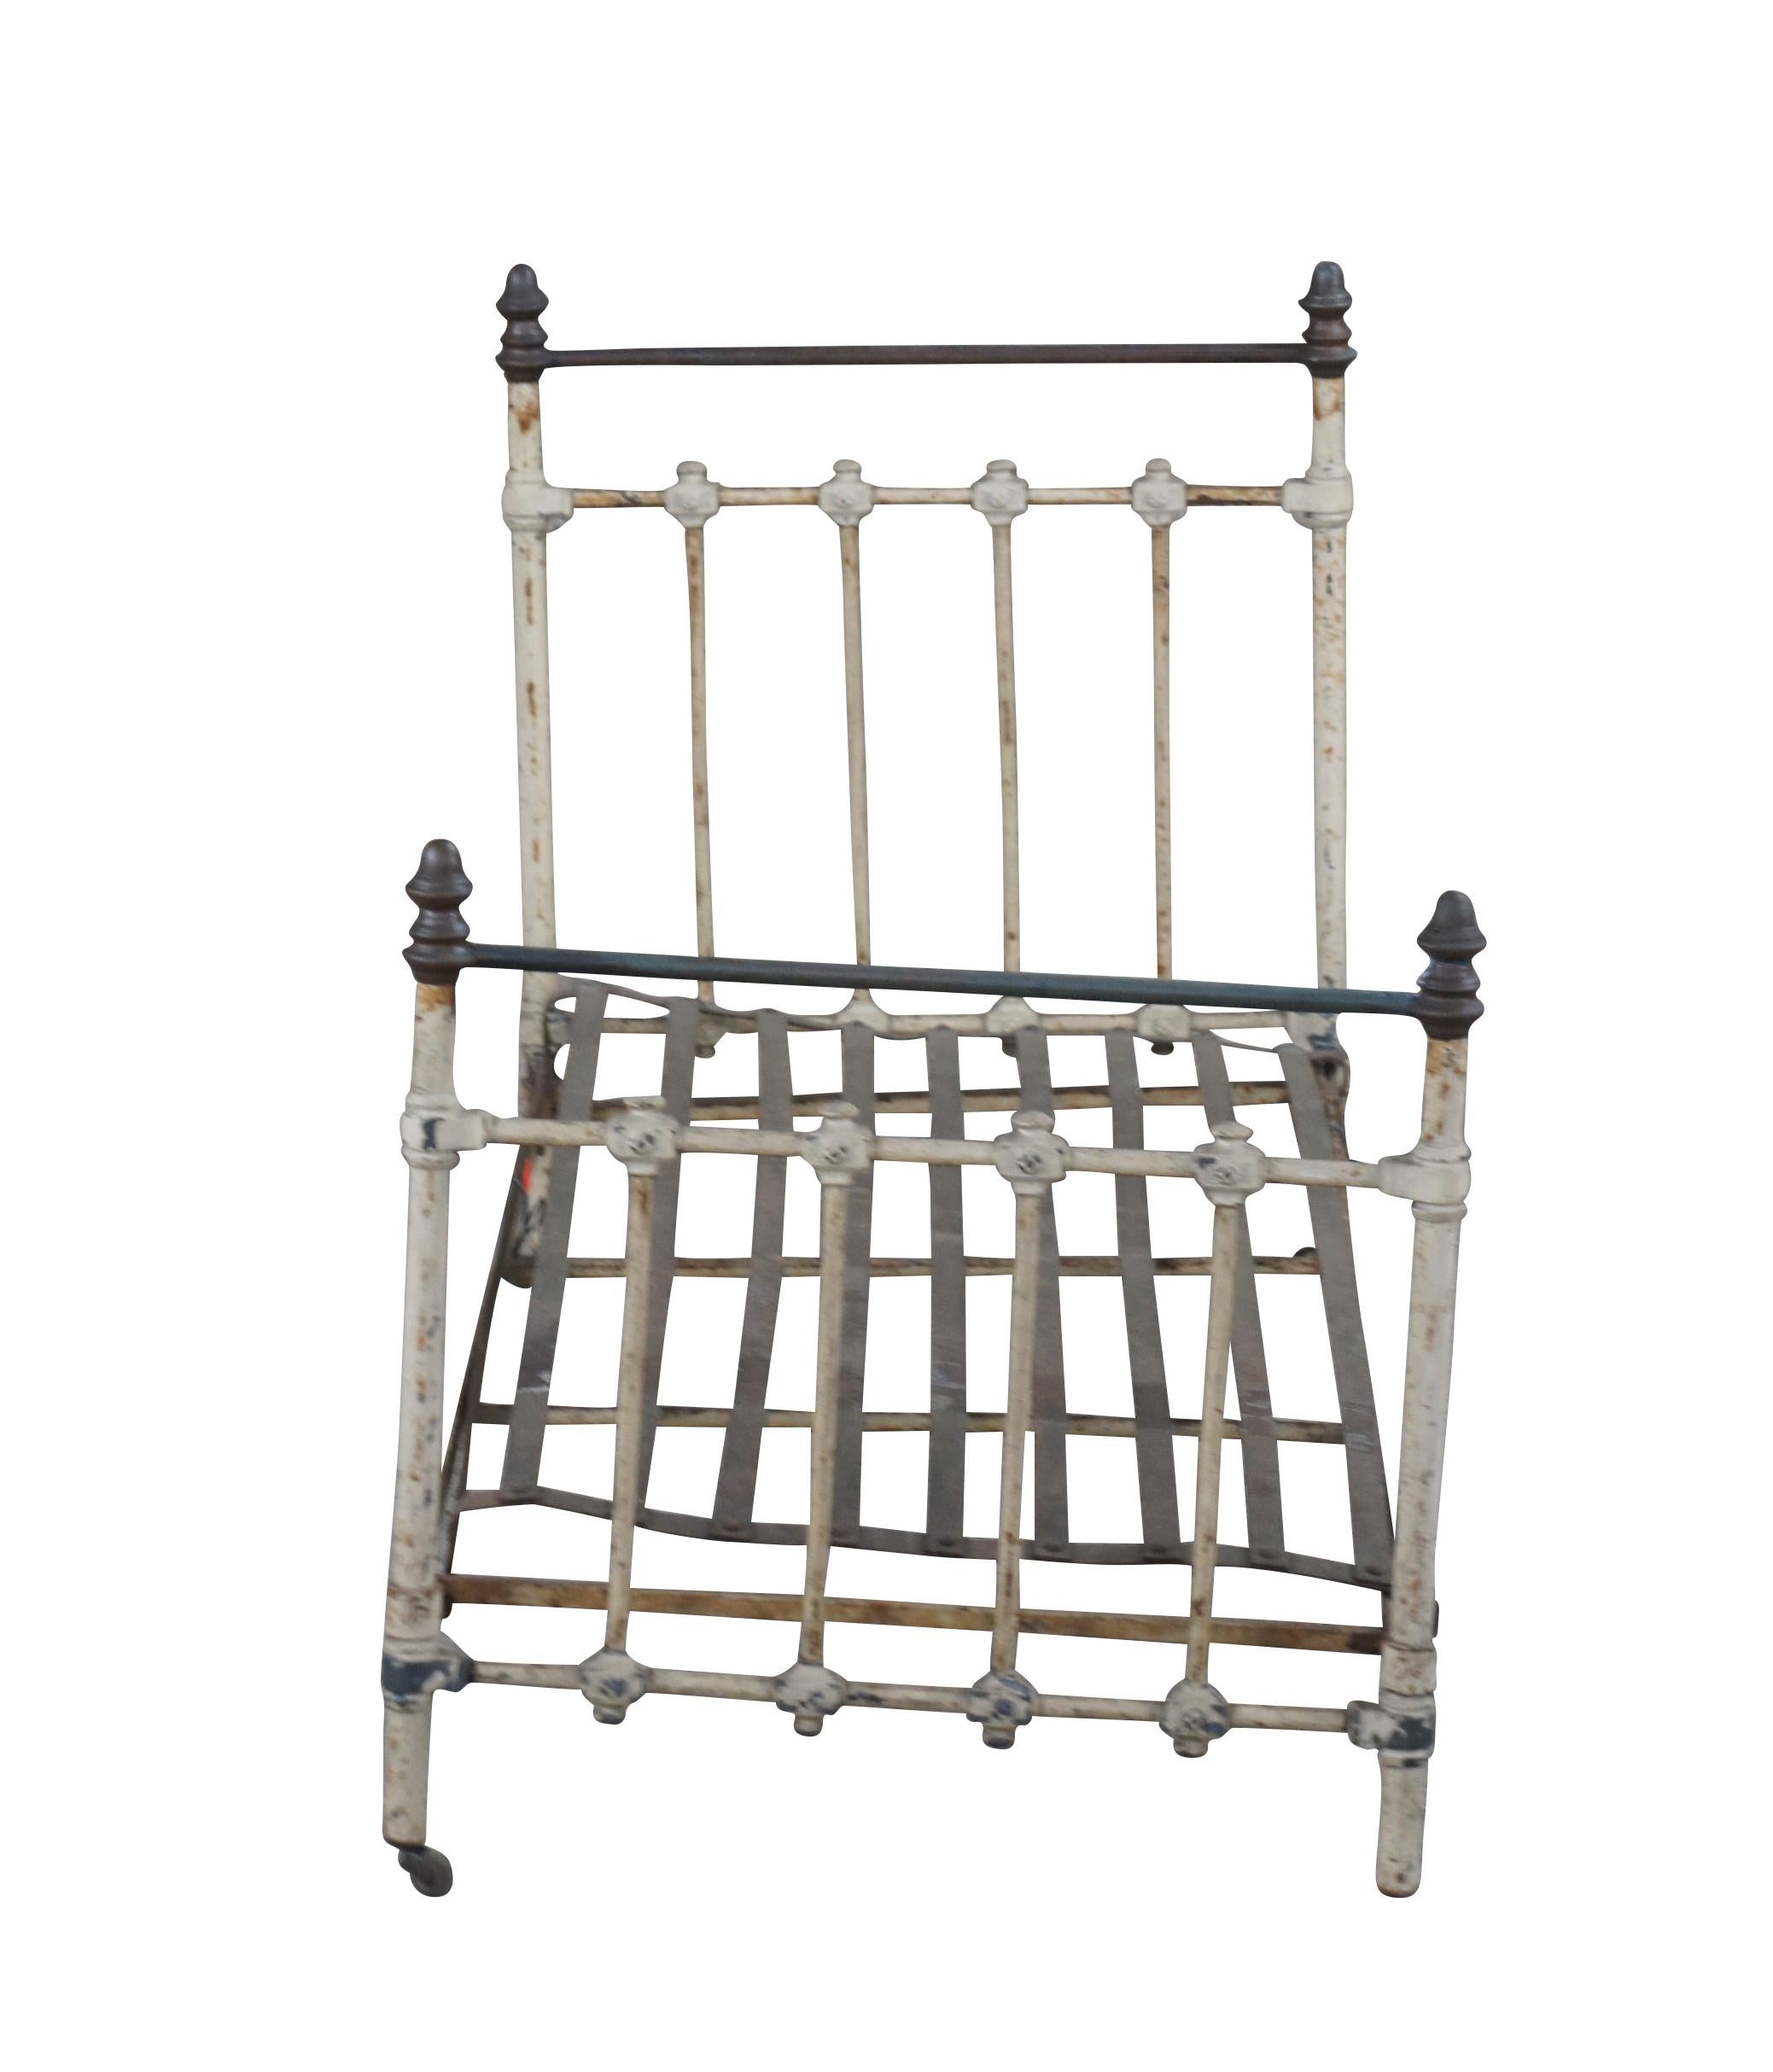 An antique Victorian Salesman Sample bed frame.  Made from iron with brass toppers.  

Antique salesman samples (a.k.a. salesman's samples, or salesmen samples) are small scale versions of actual commercial products that were used to sell a